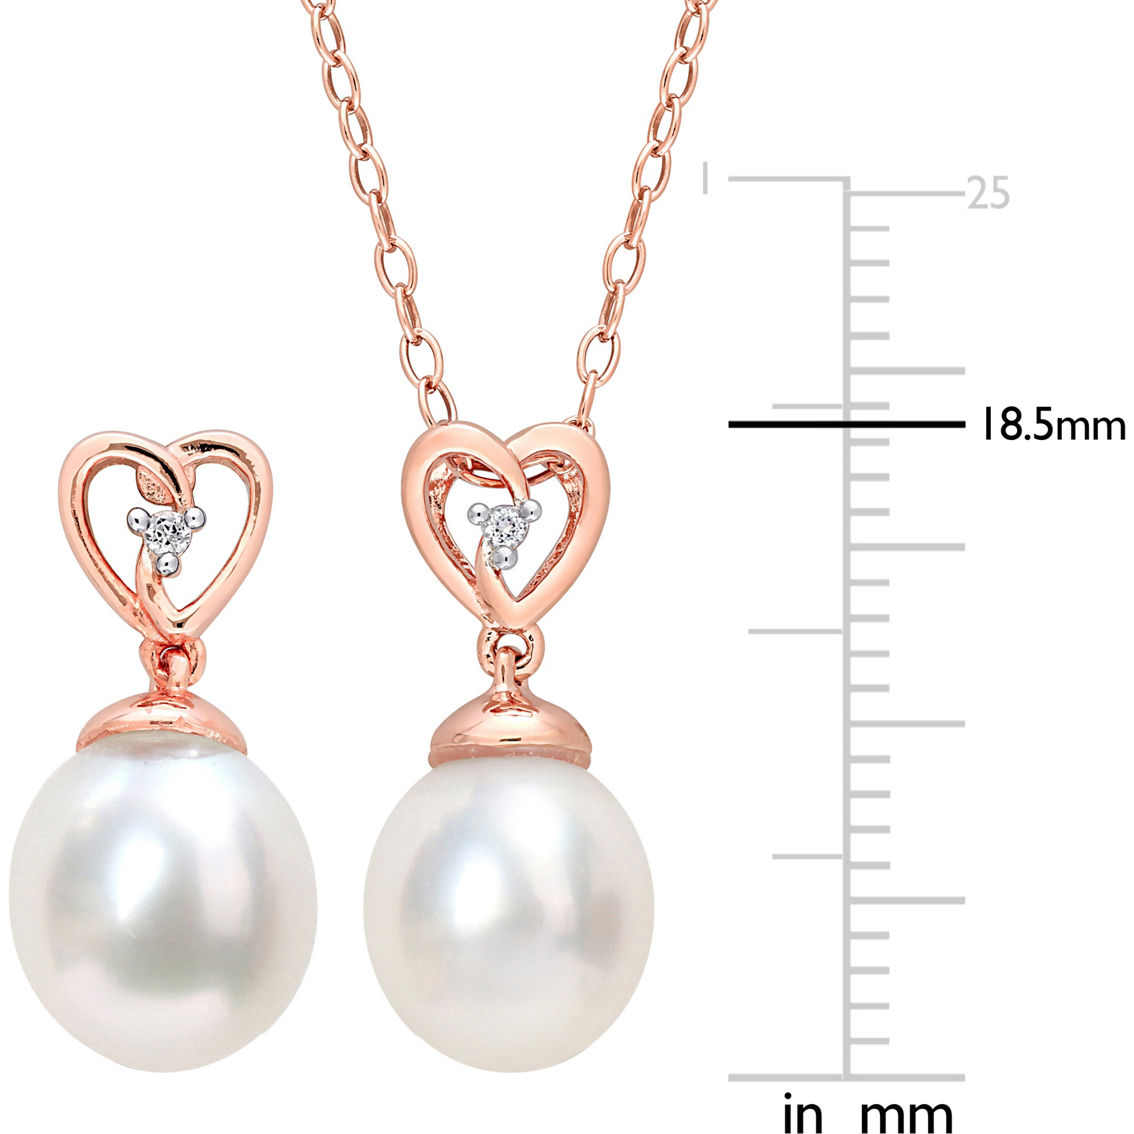 Sofia B. Cultured South Sea Pearl White Topaz Heart Earrings & Necklace 2 pc. Set - Image 4 of 4